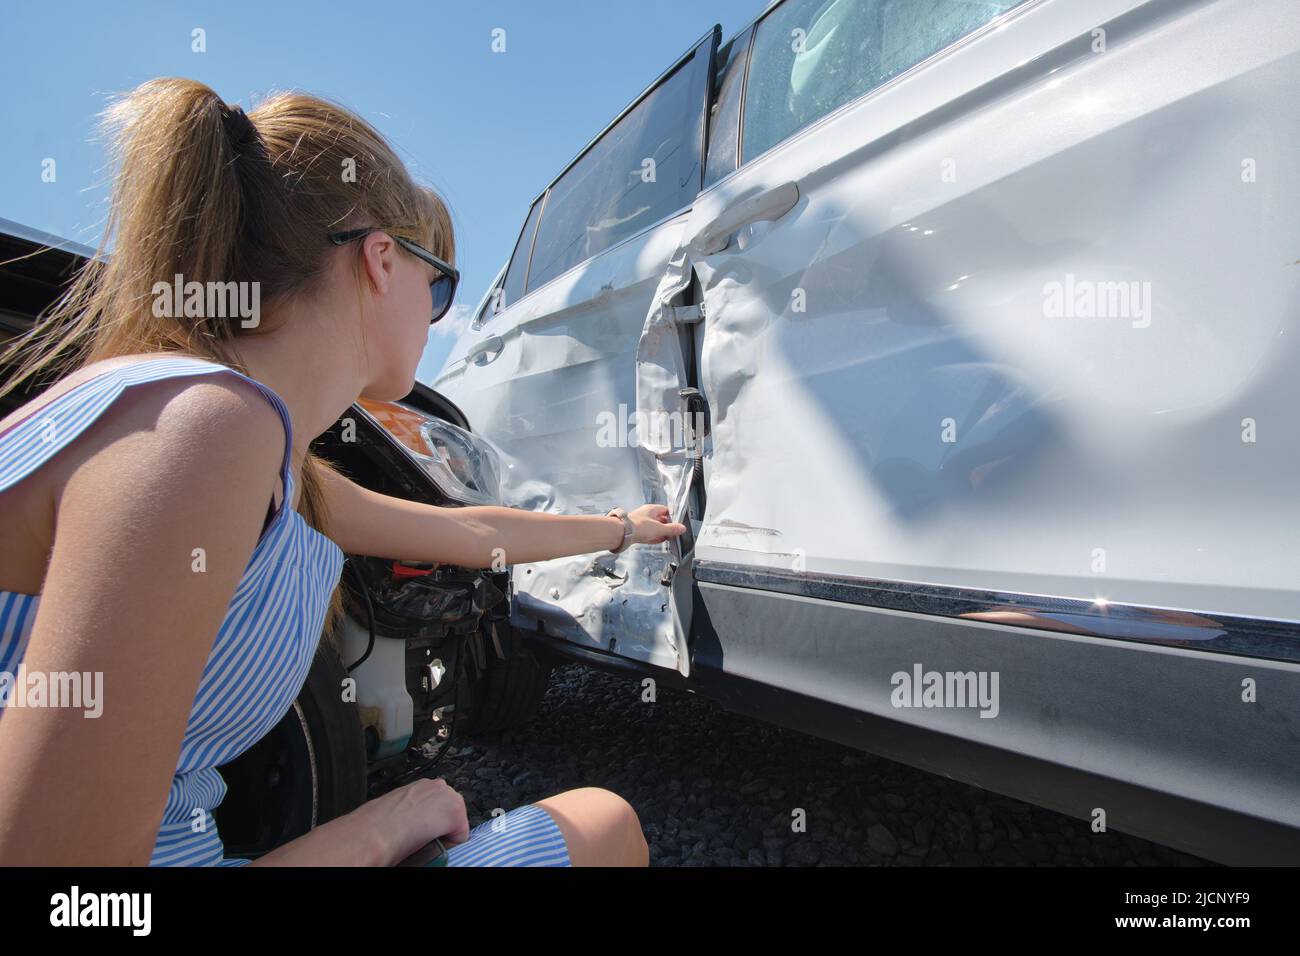 Sad female driver sitting on street side shocked after car accident. Road safety and vehicle insurance concept Stock Photo